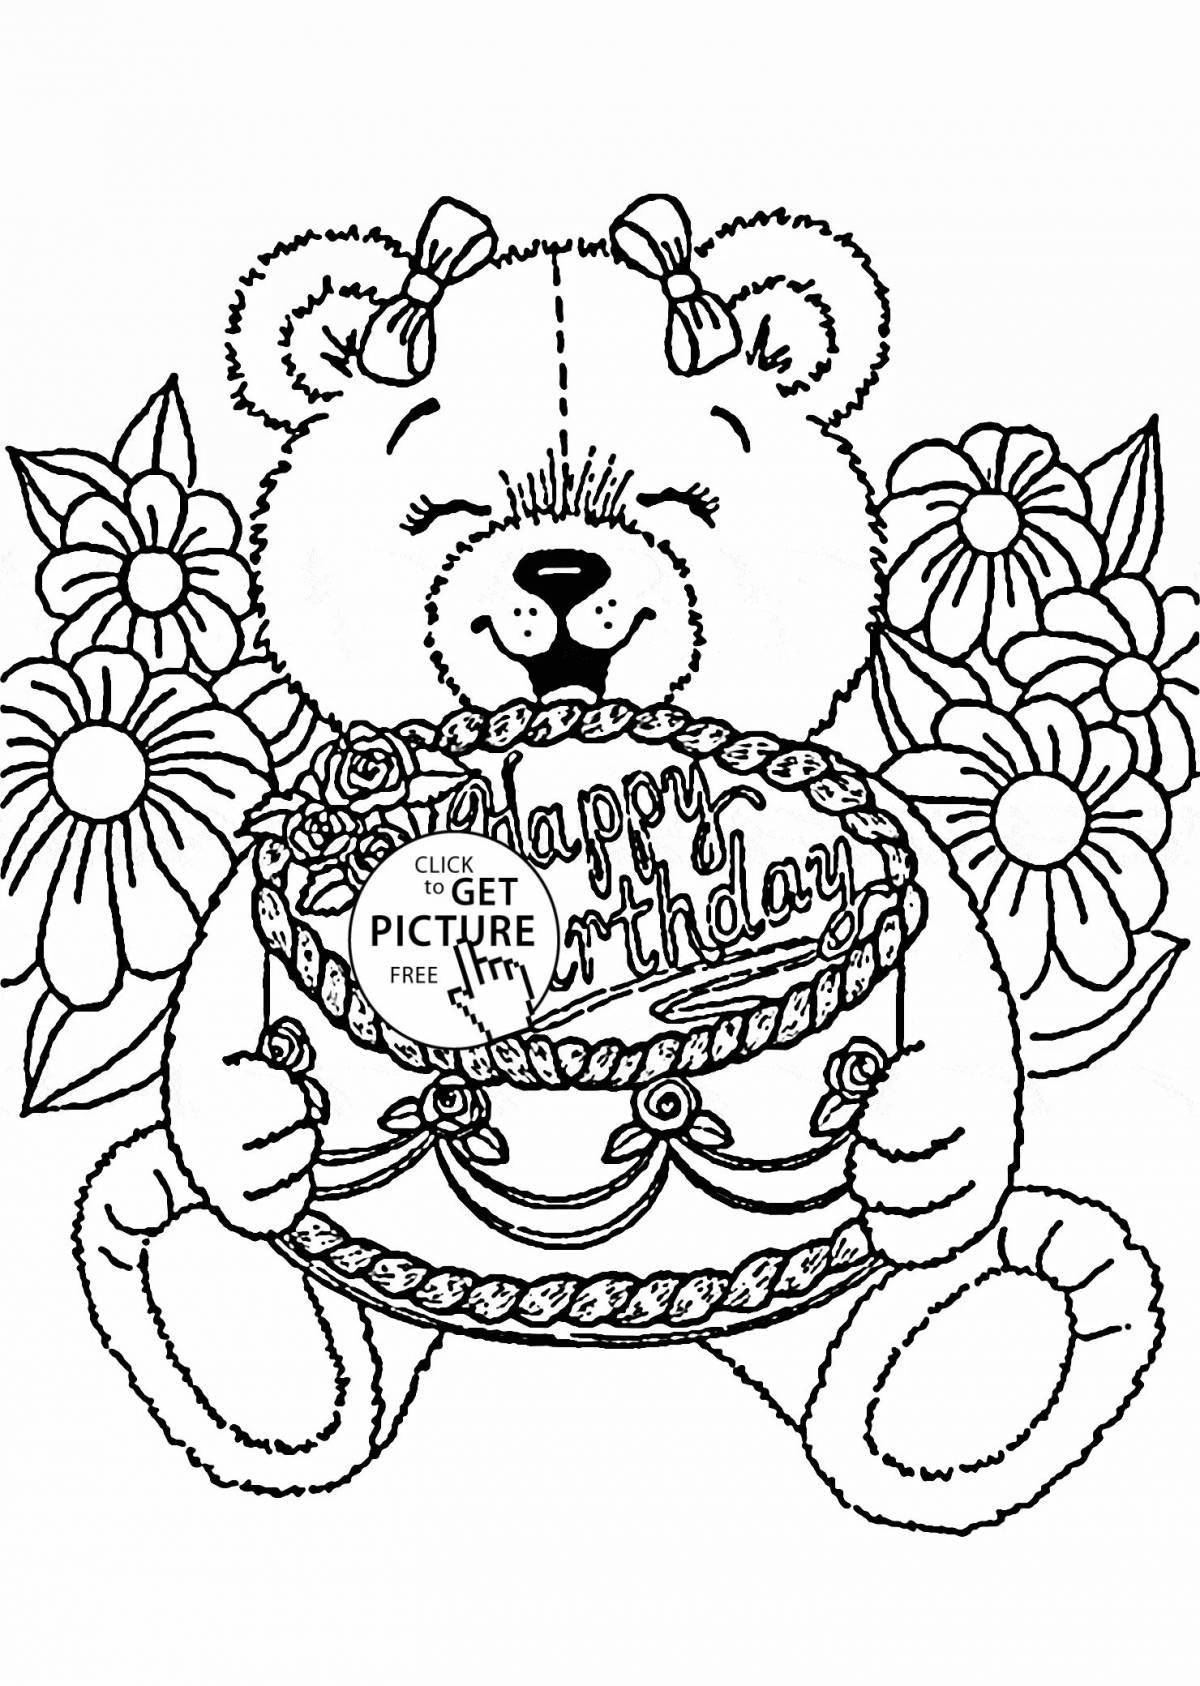 Coloring page playful little sister happy birthday